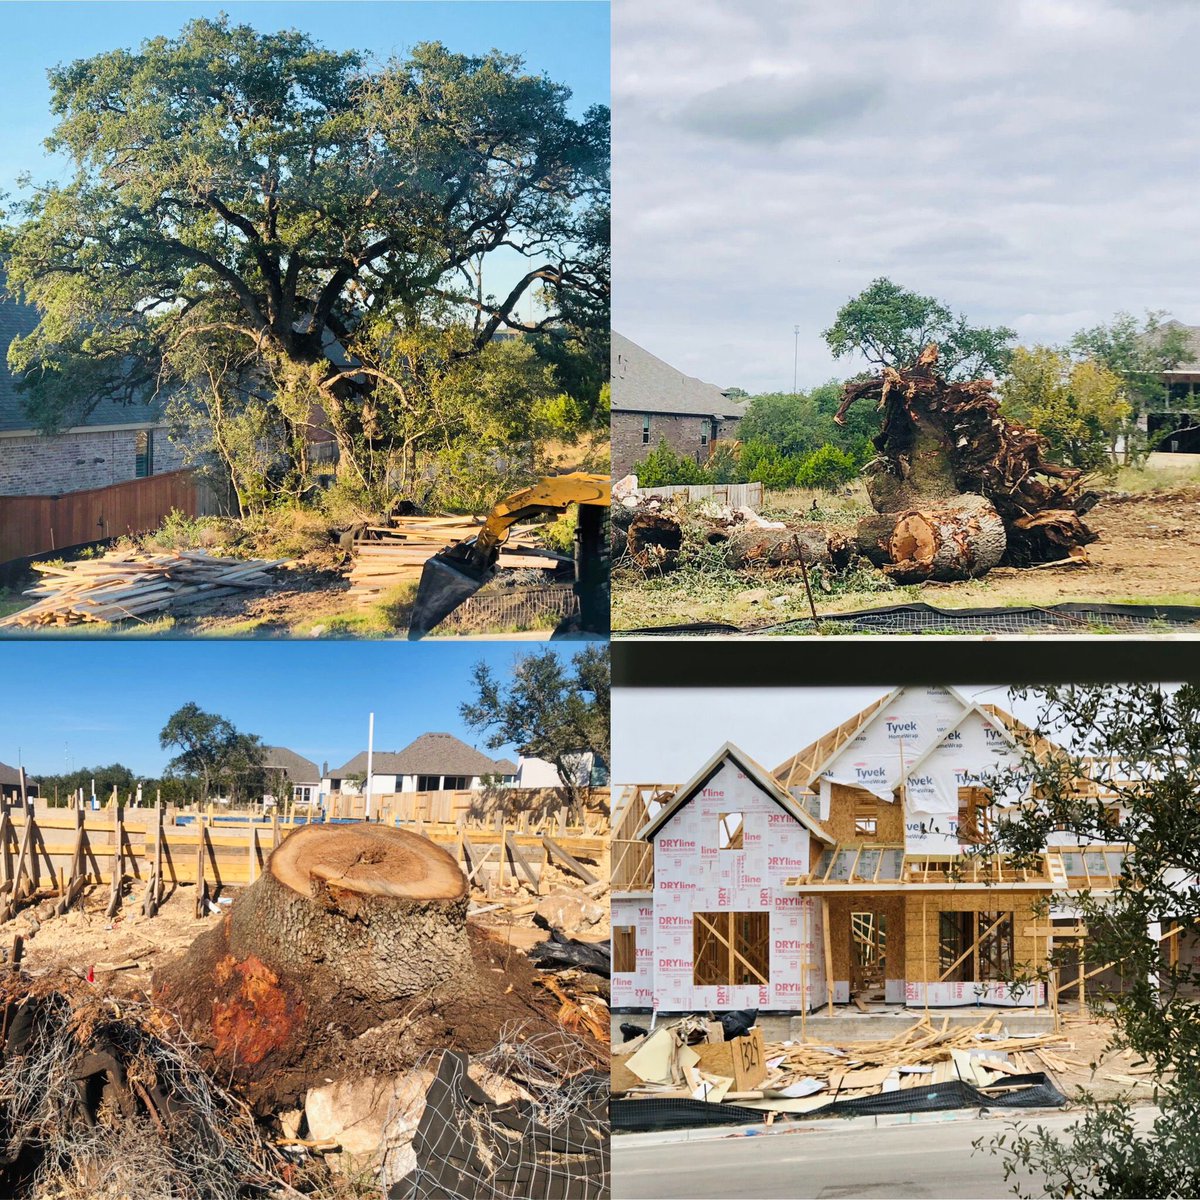 #development #kills #trees Old systems still destroying. No wonder #Texas is #hotter each year & #droughts continue #HaysCounty #SanMarcos #unsustainable #heritageoaks